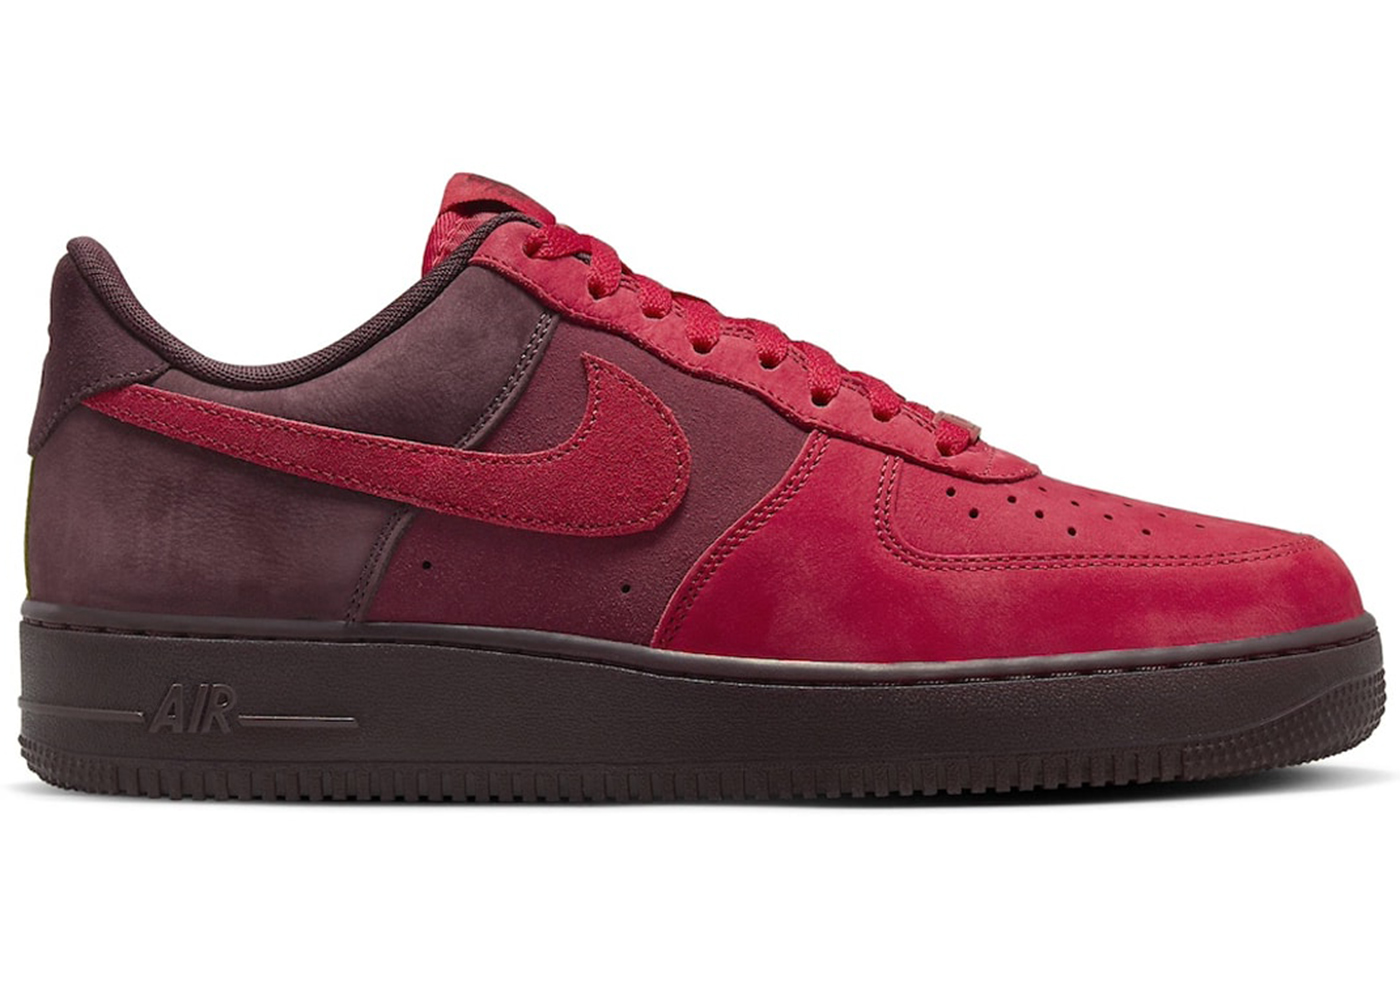 Nike Air Force 1 Low Layers of Love Men's - FZ4033-657 - US